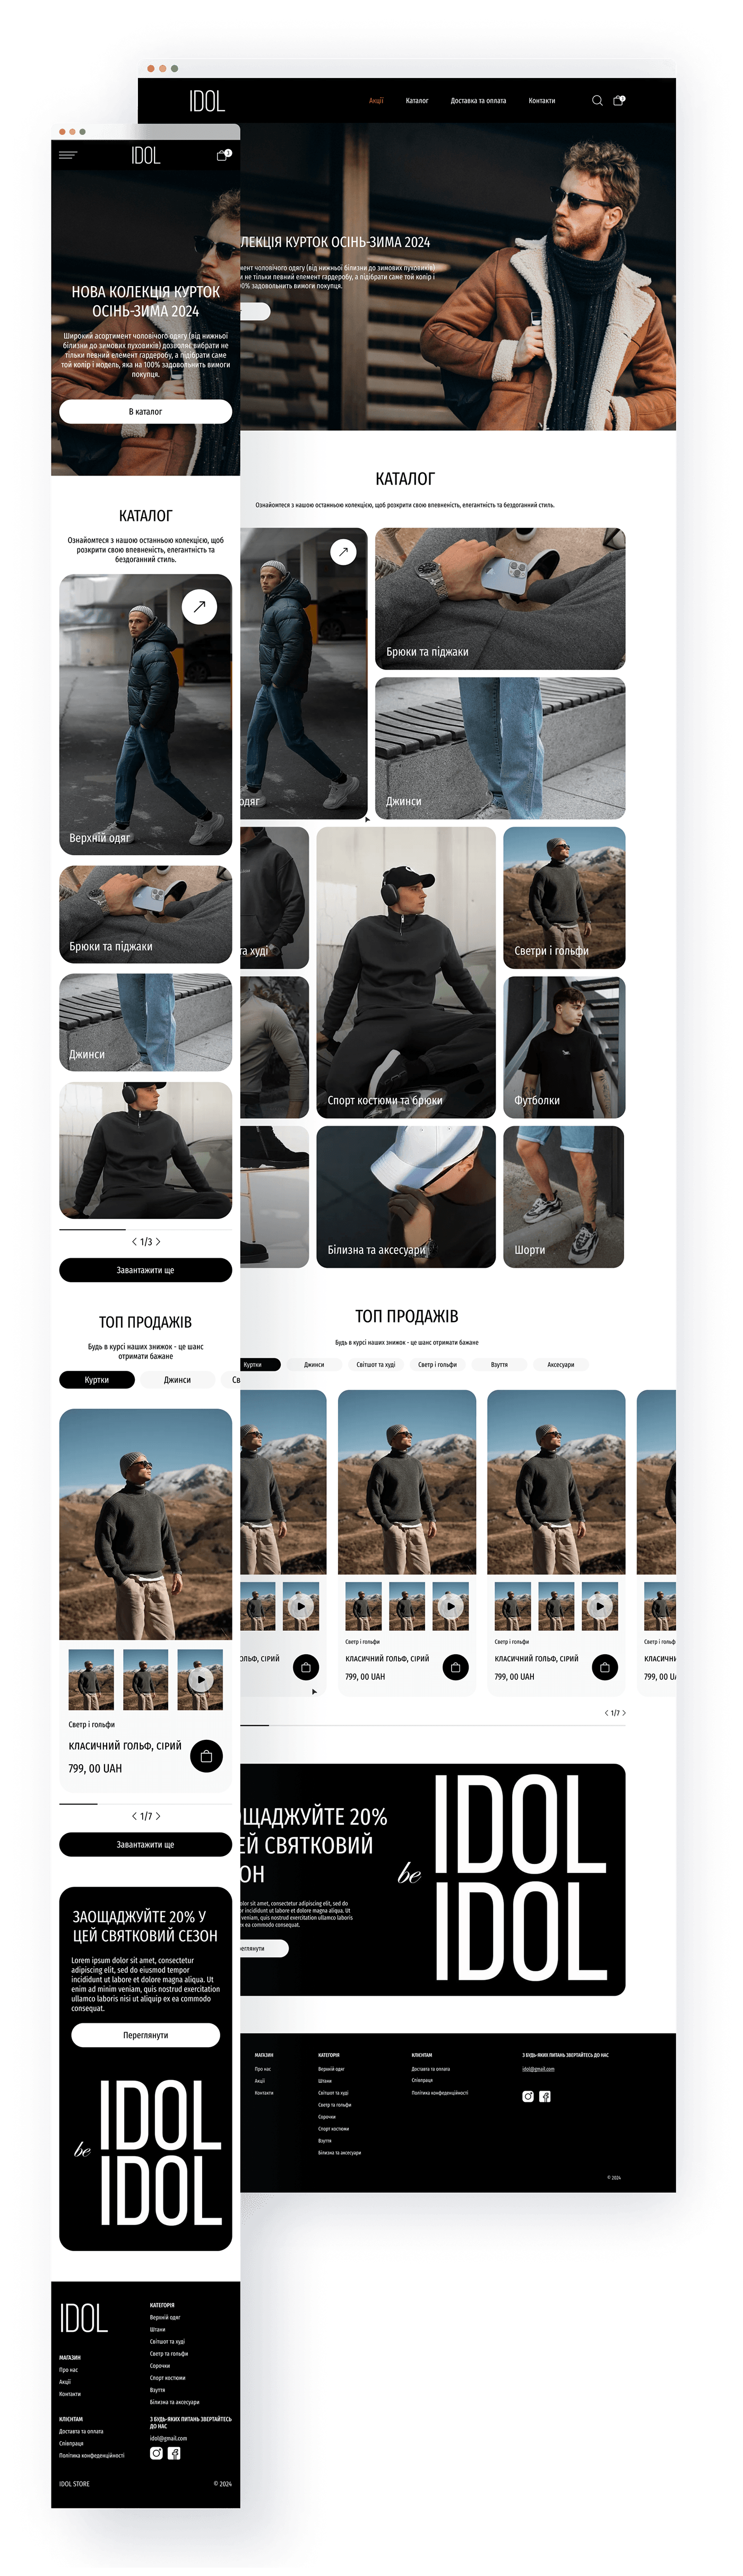 UI/UX online store Web Design  Figma Mobile app man Fashion  Clothing clothers